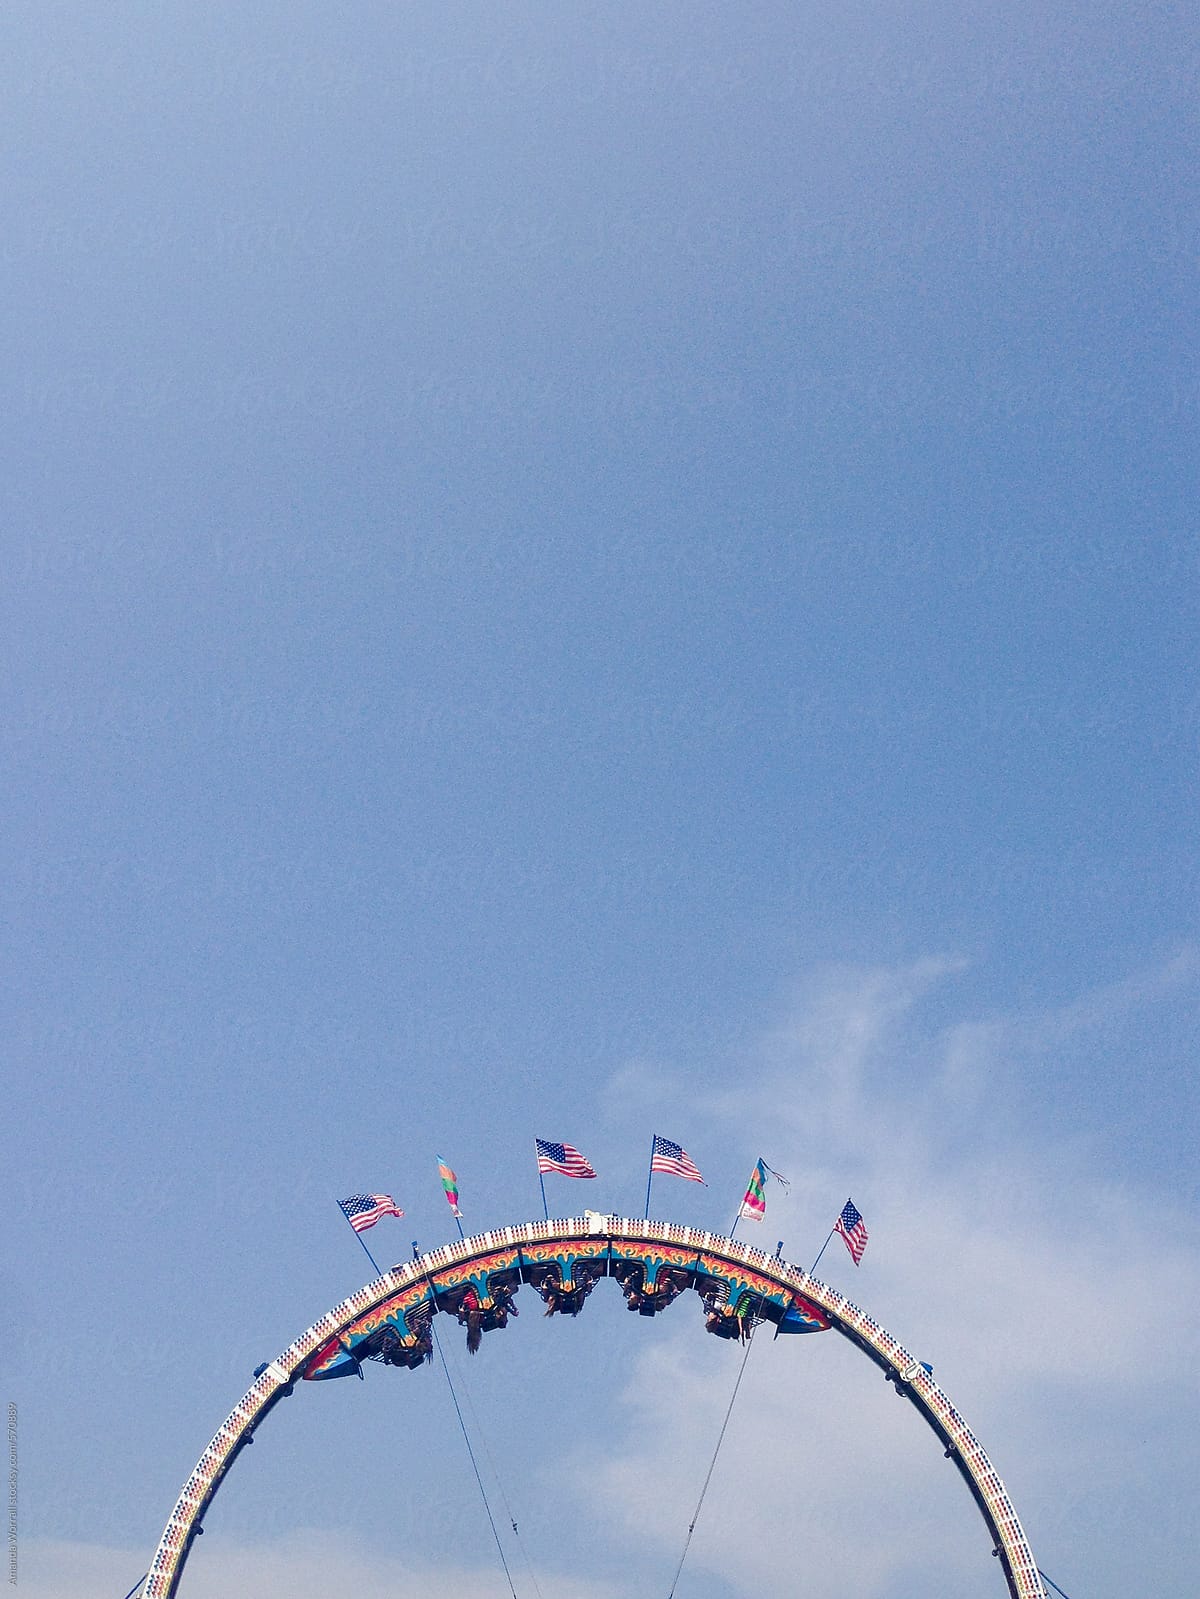 Circular carnival ride with American flags against a blue sky